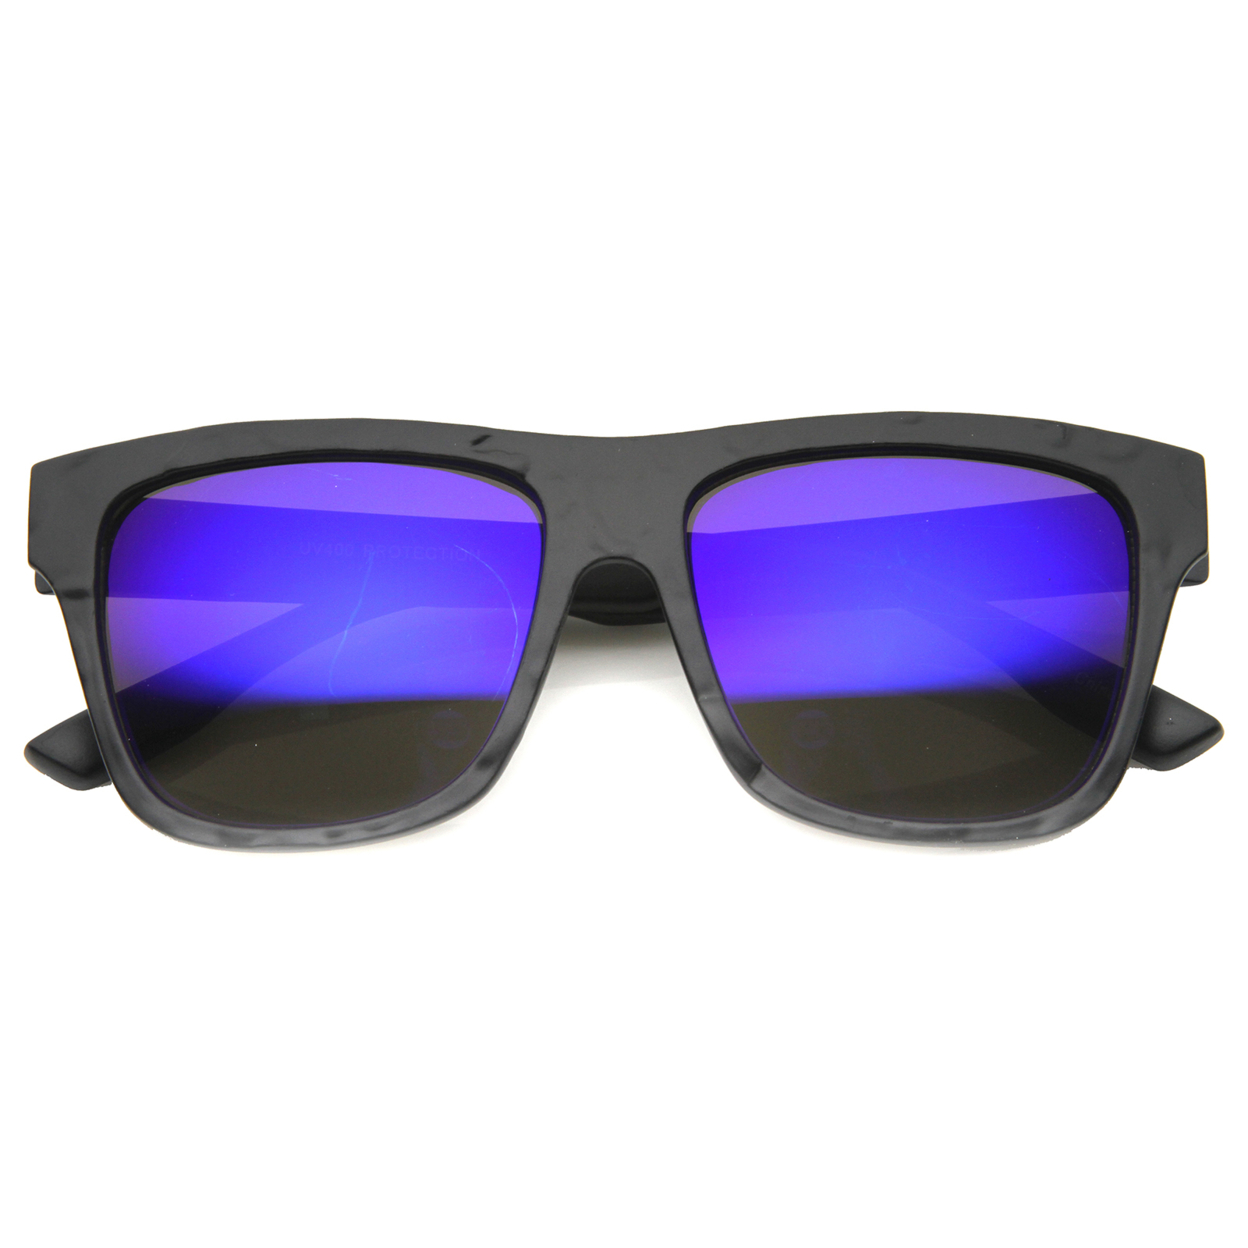 Unisex Horn Rimmed Sunglasses With UV400 Protected Mirrored Lens 9864 - Shiny-Black / Midnight